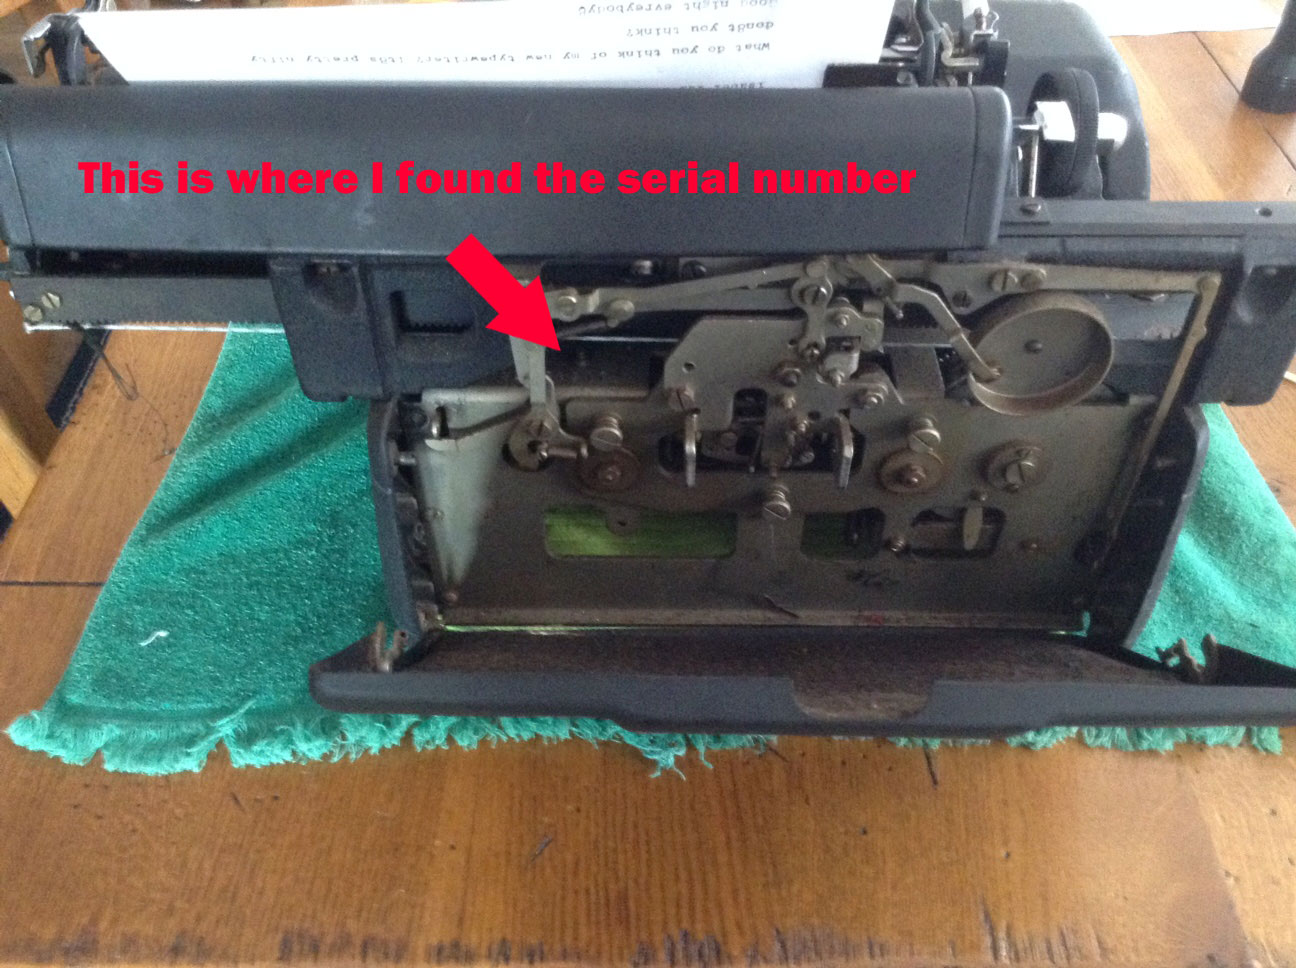 remington serial numbers date manufactured